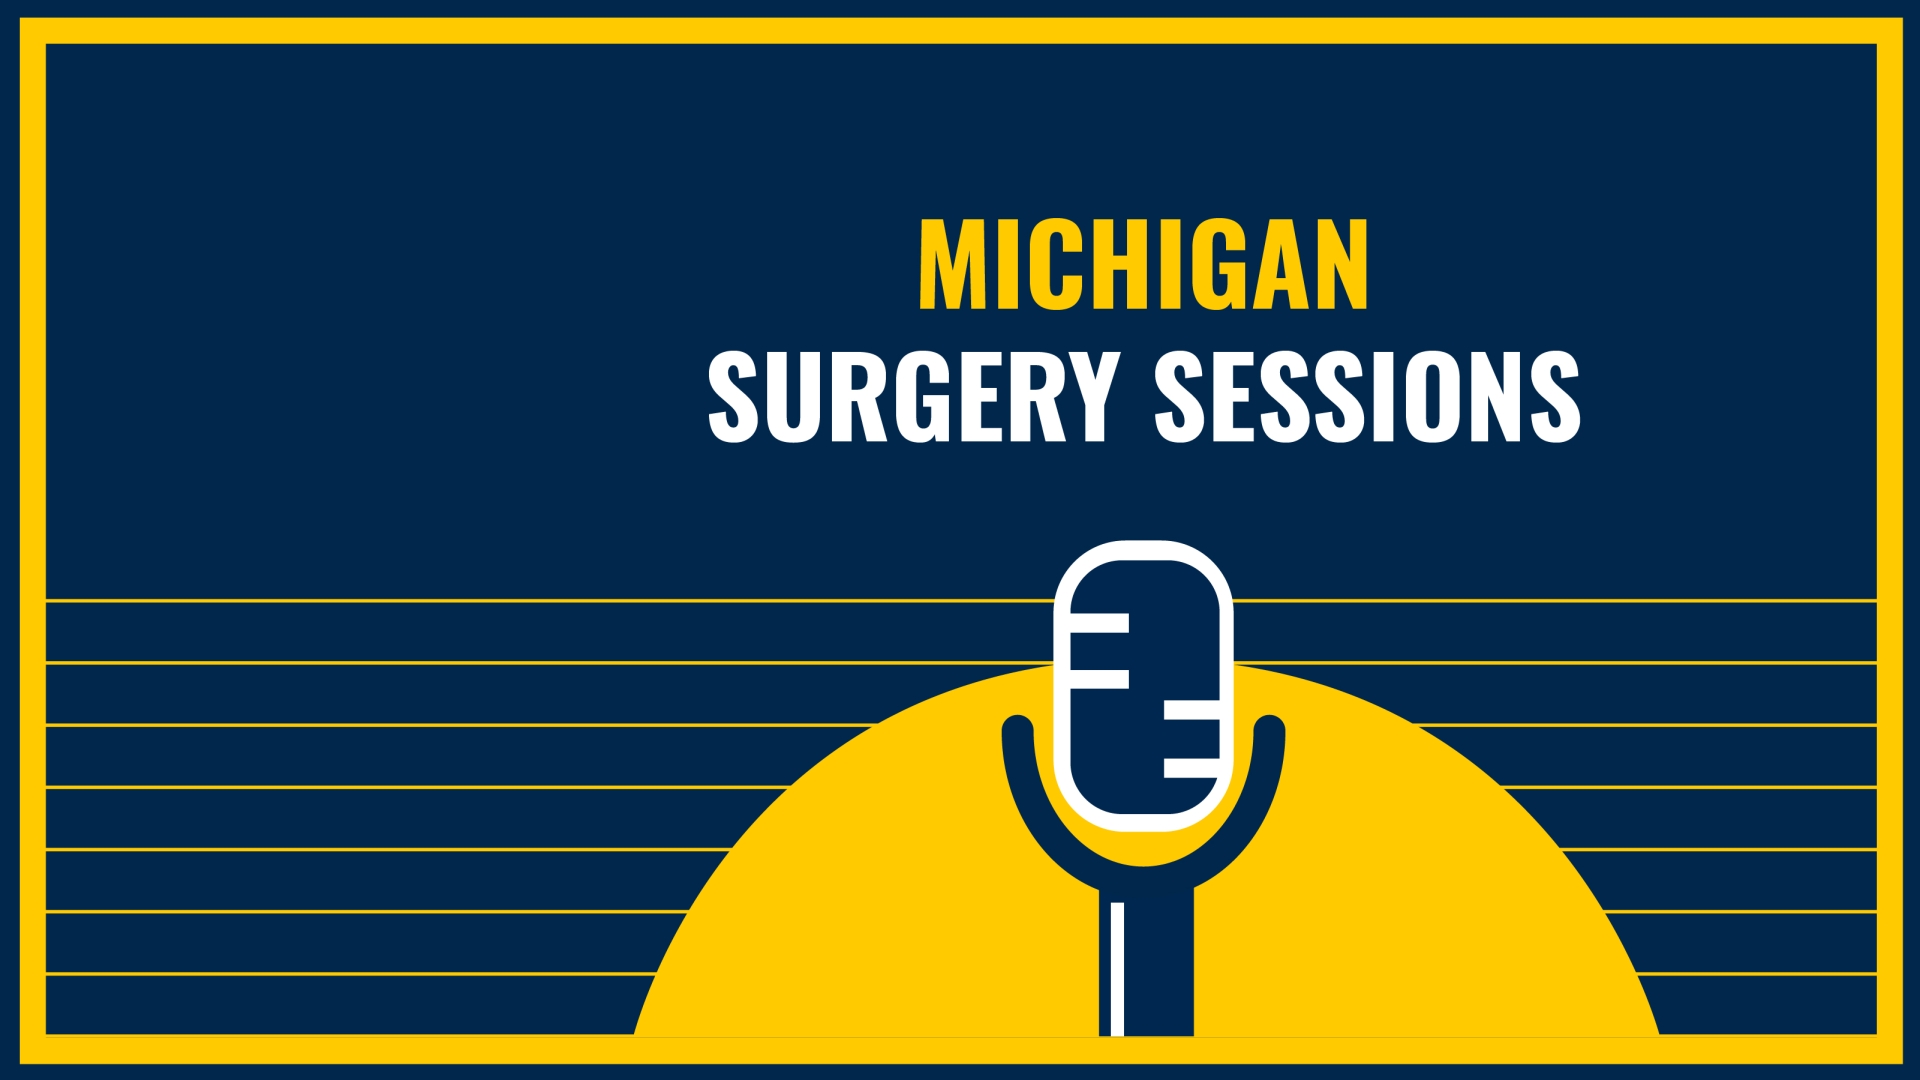 Michigan Surgery Session with a dark blue microphone overlaying a yellow half circle on a dark blue background that is outlined in yellow.